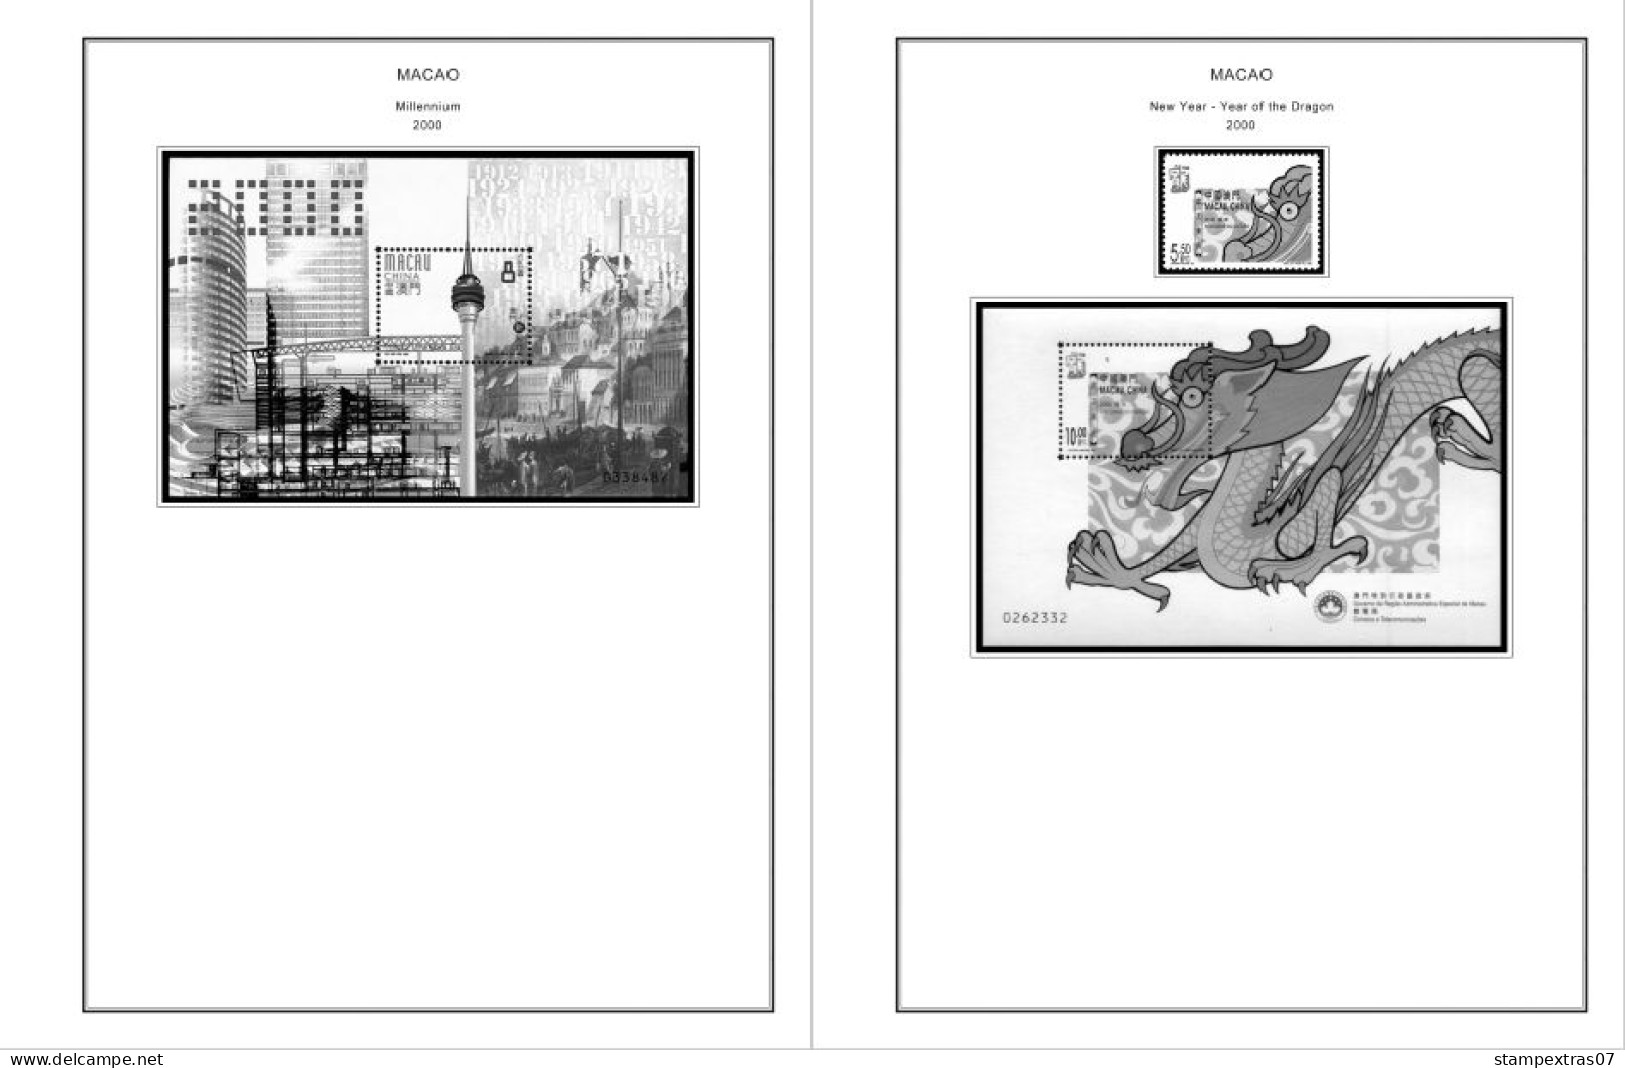 MACAO [SAR] 1999-2010 + 2011-2020 STAMP ALBUM PAGES (248 B&w Illustrated Pages) - Engels